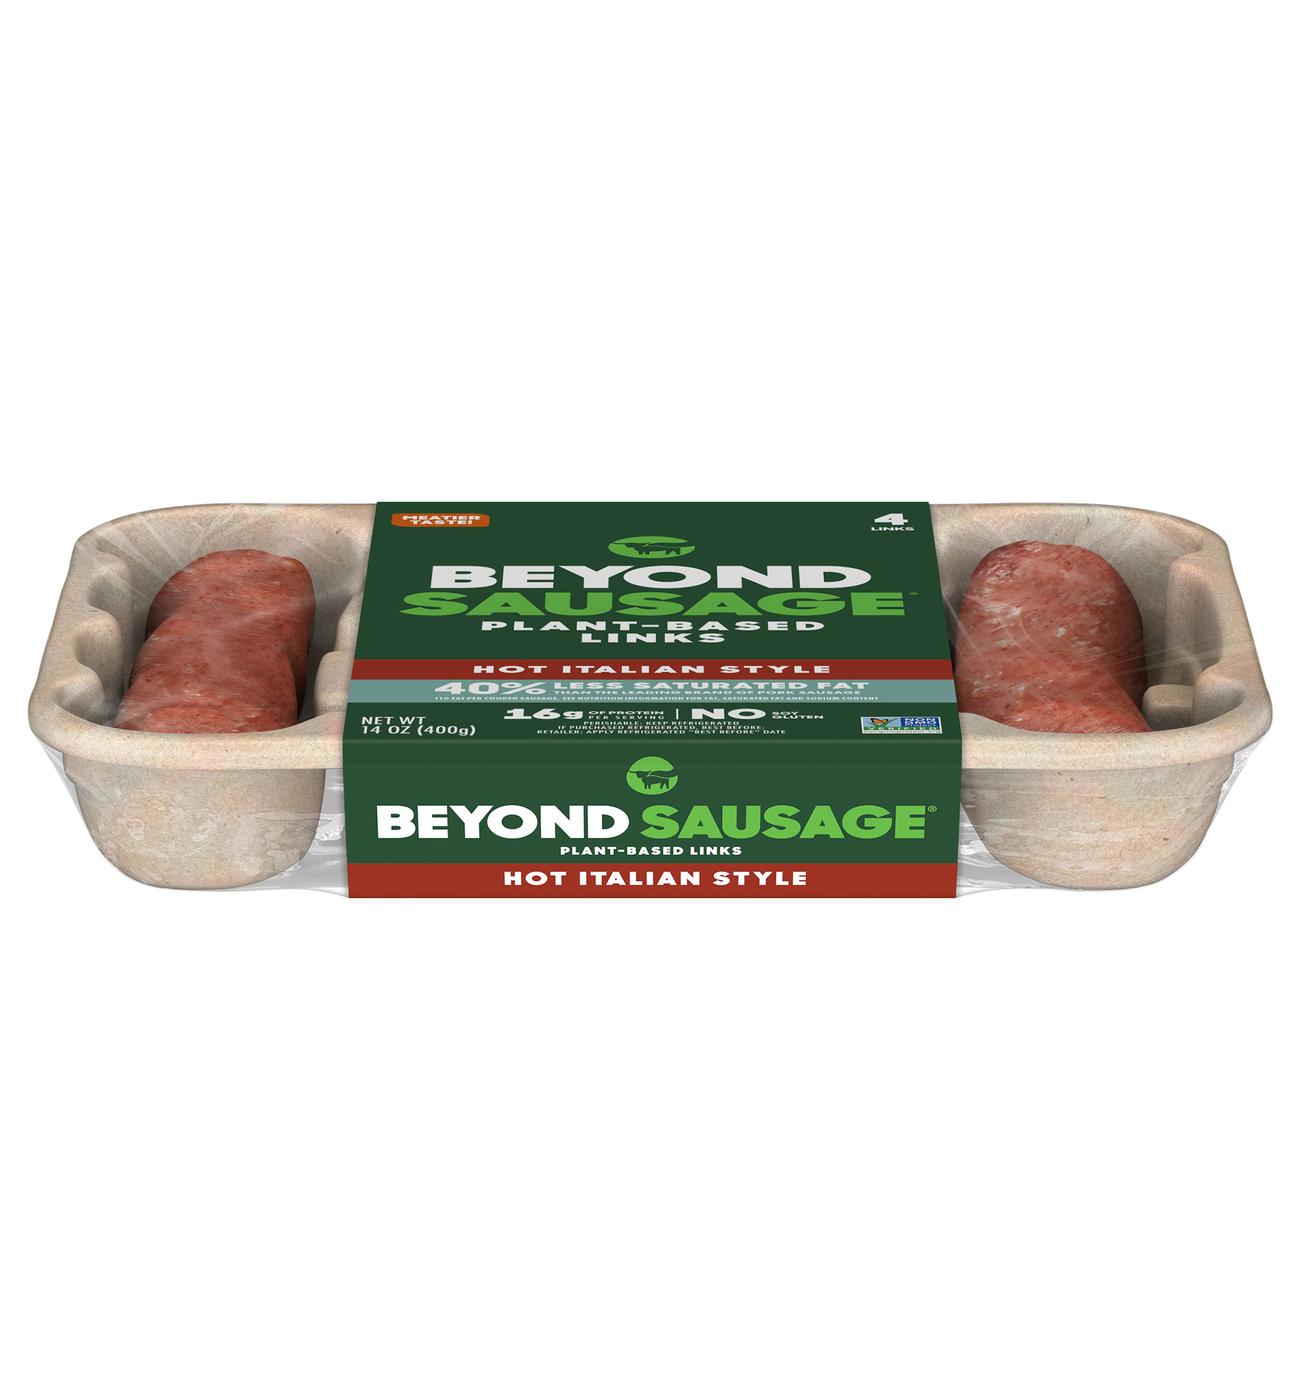 Beyond Meat Beyond Sausage Frozen Plant-Based Sausage Links - Hot Italian Style; image 2 of 4